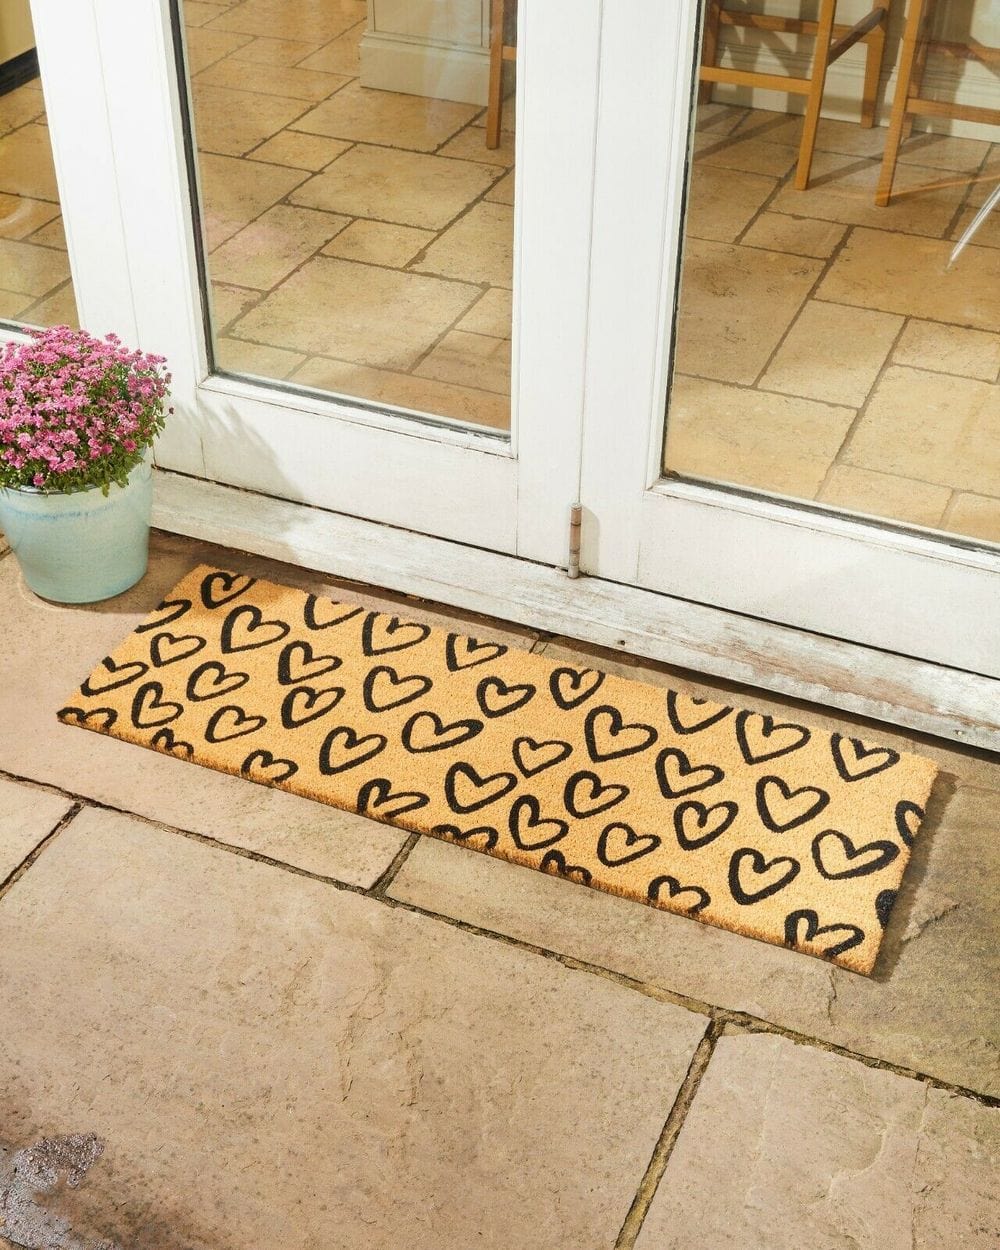 Astley Hand Drawn Doormat with PVC Backing 40 x 120cm TapClickBuy